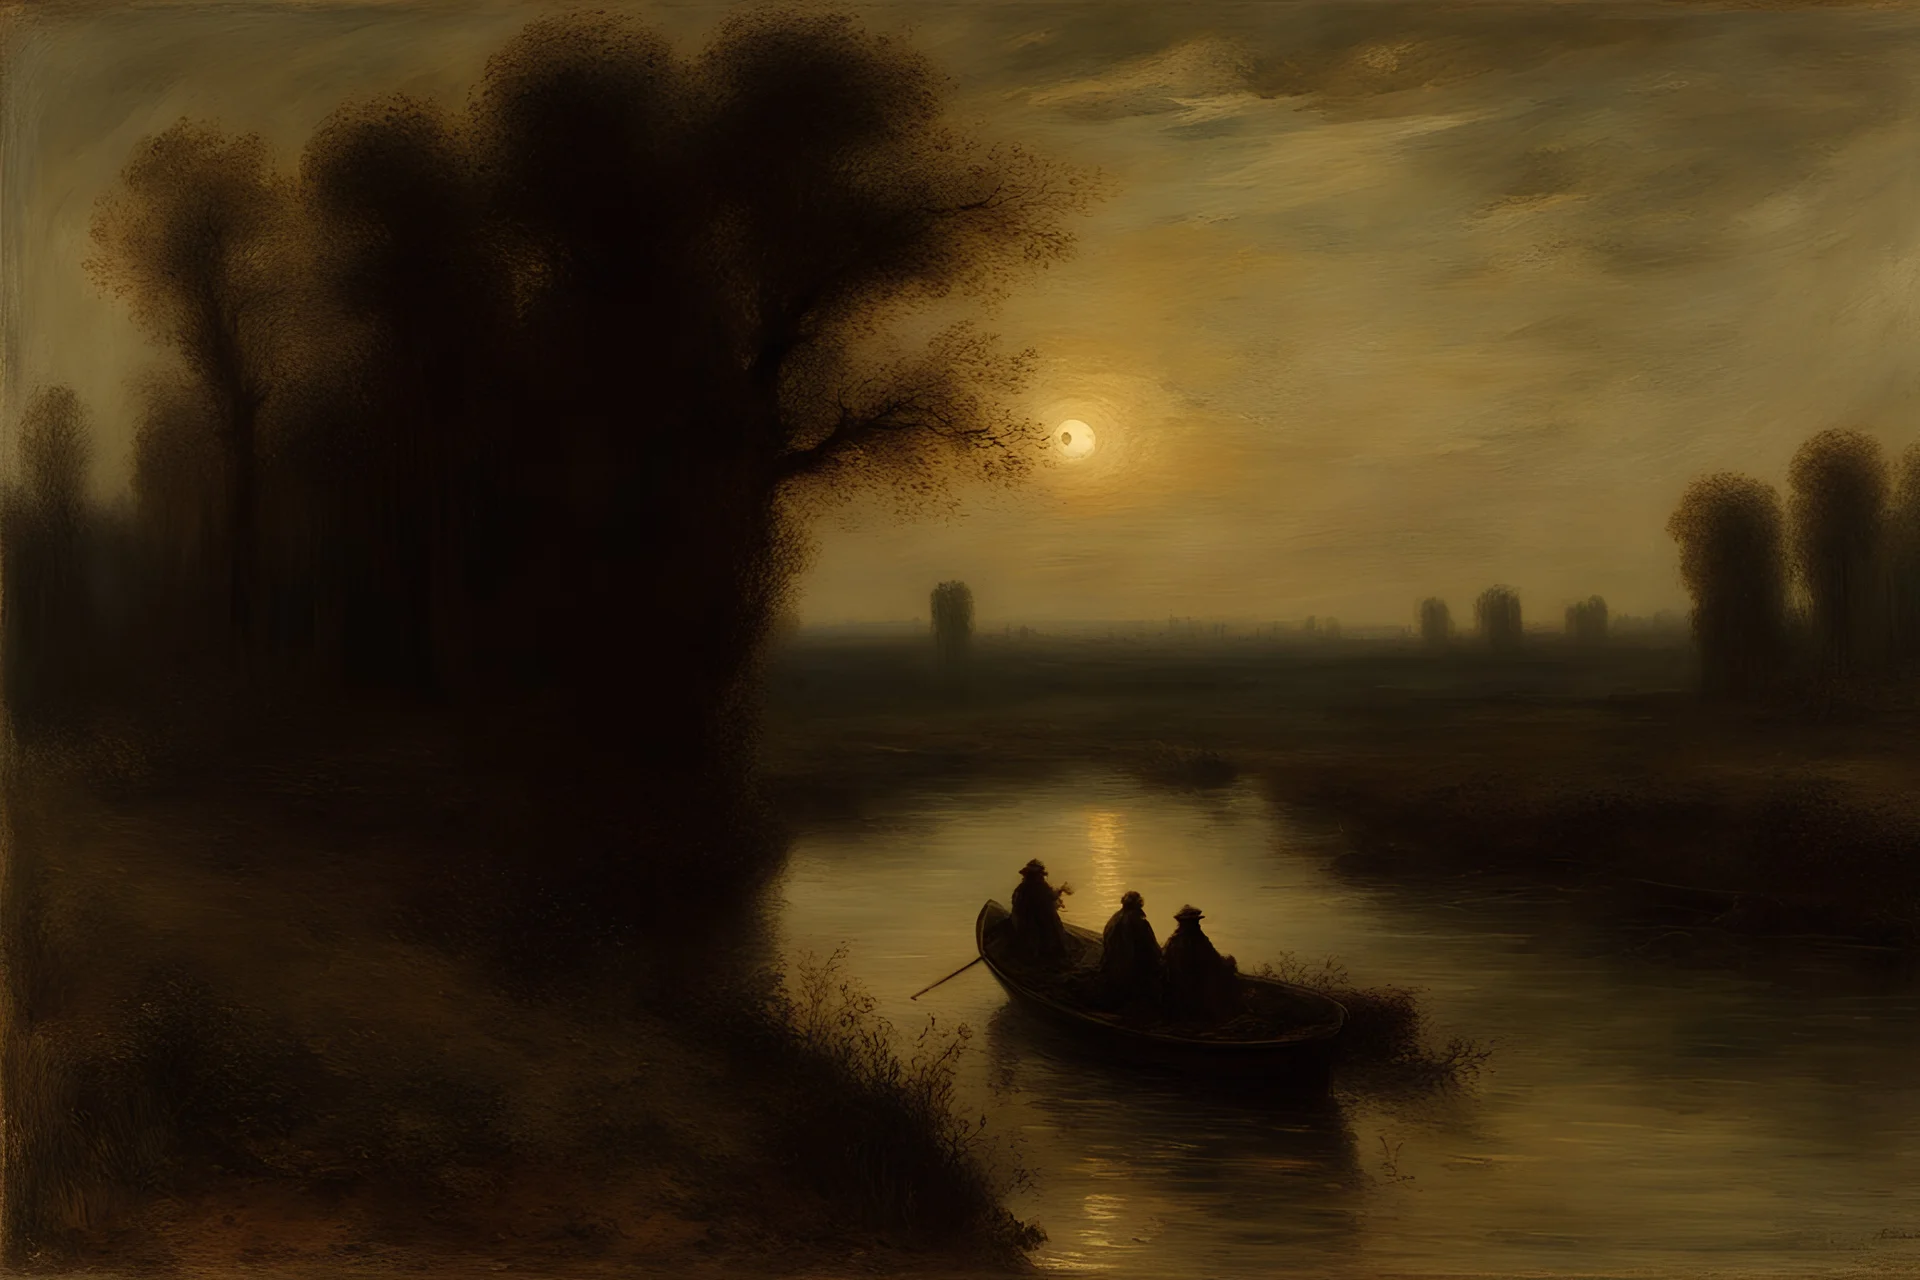 dry high weeds, creepy horror night, river, trees, mistery, philosophic and gothic horror influence, trascendent influence, willem maris, friedrich eckenfelder, and pieter franciscus dierckx impressionism paintings